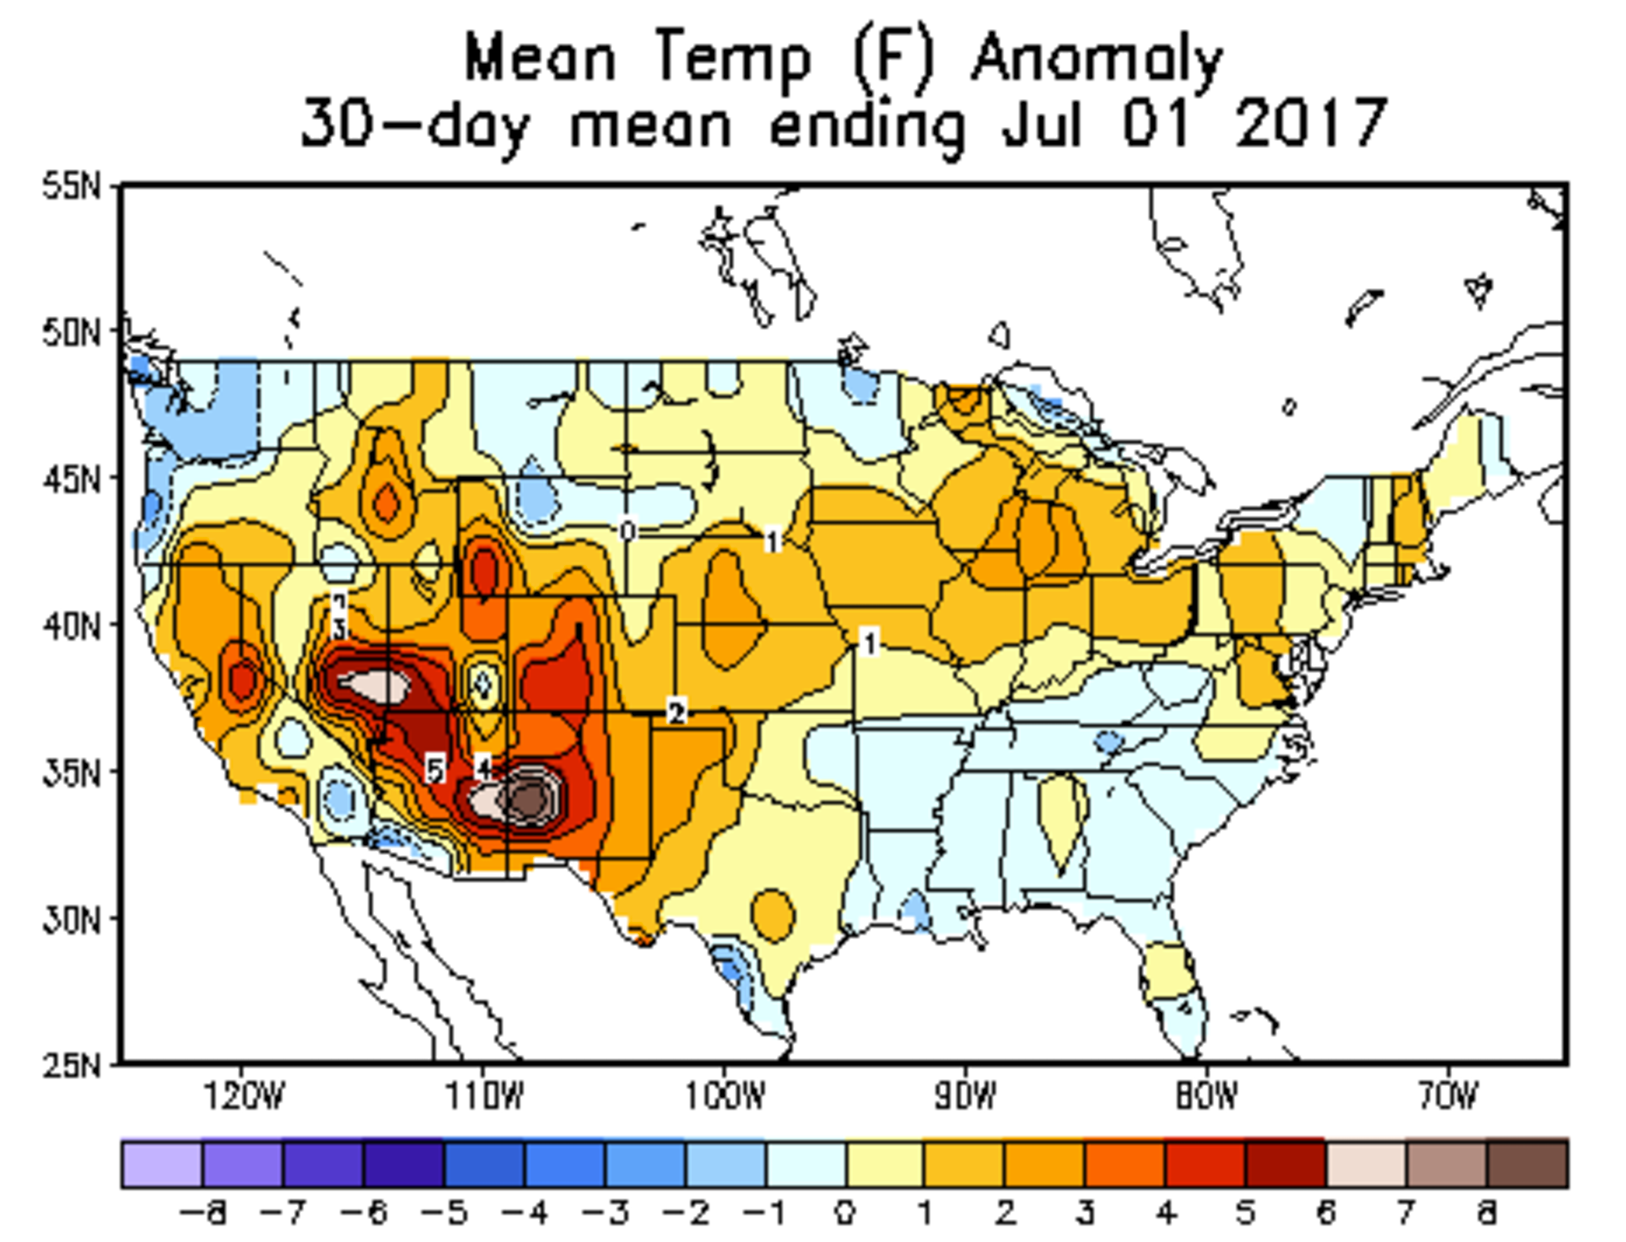 Temperature anomalies for June across the United States. Very hot across the Southwest!